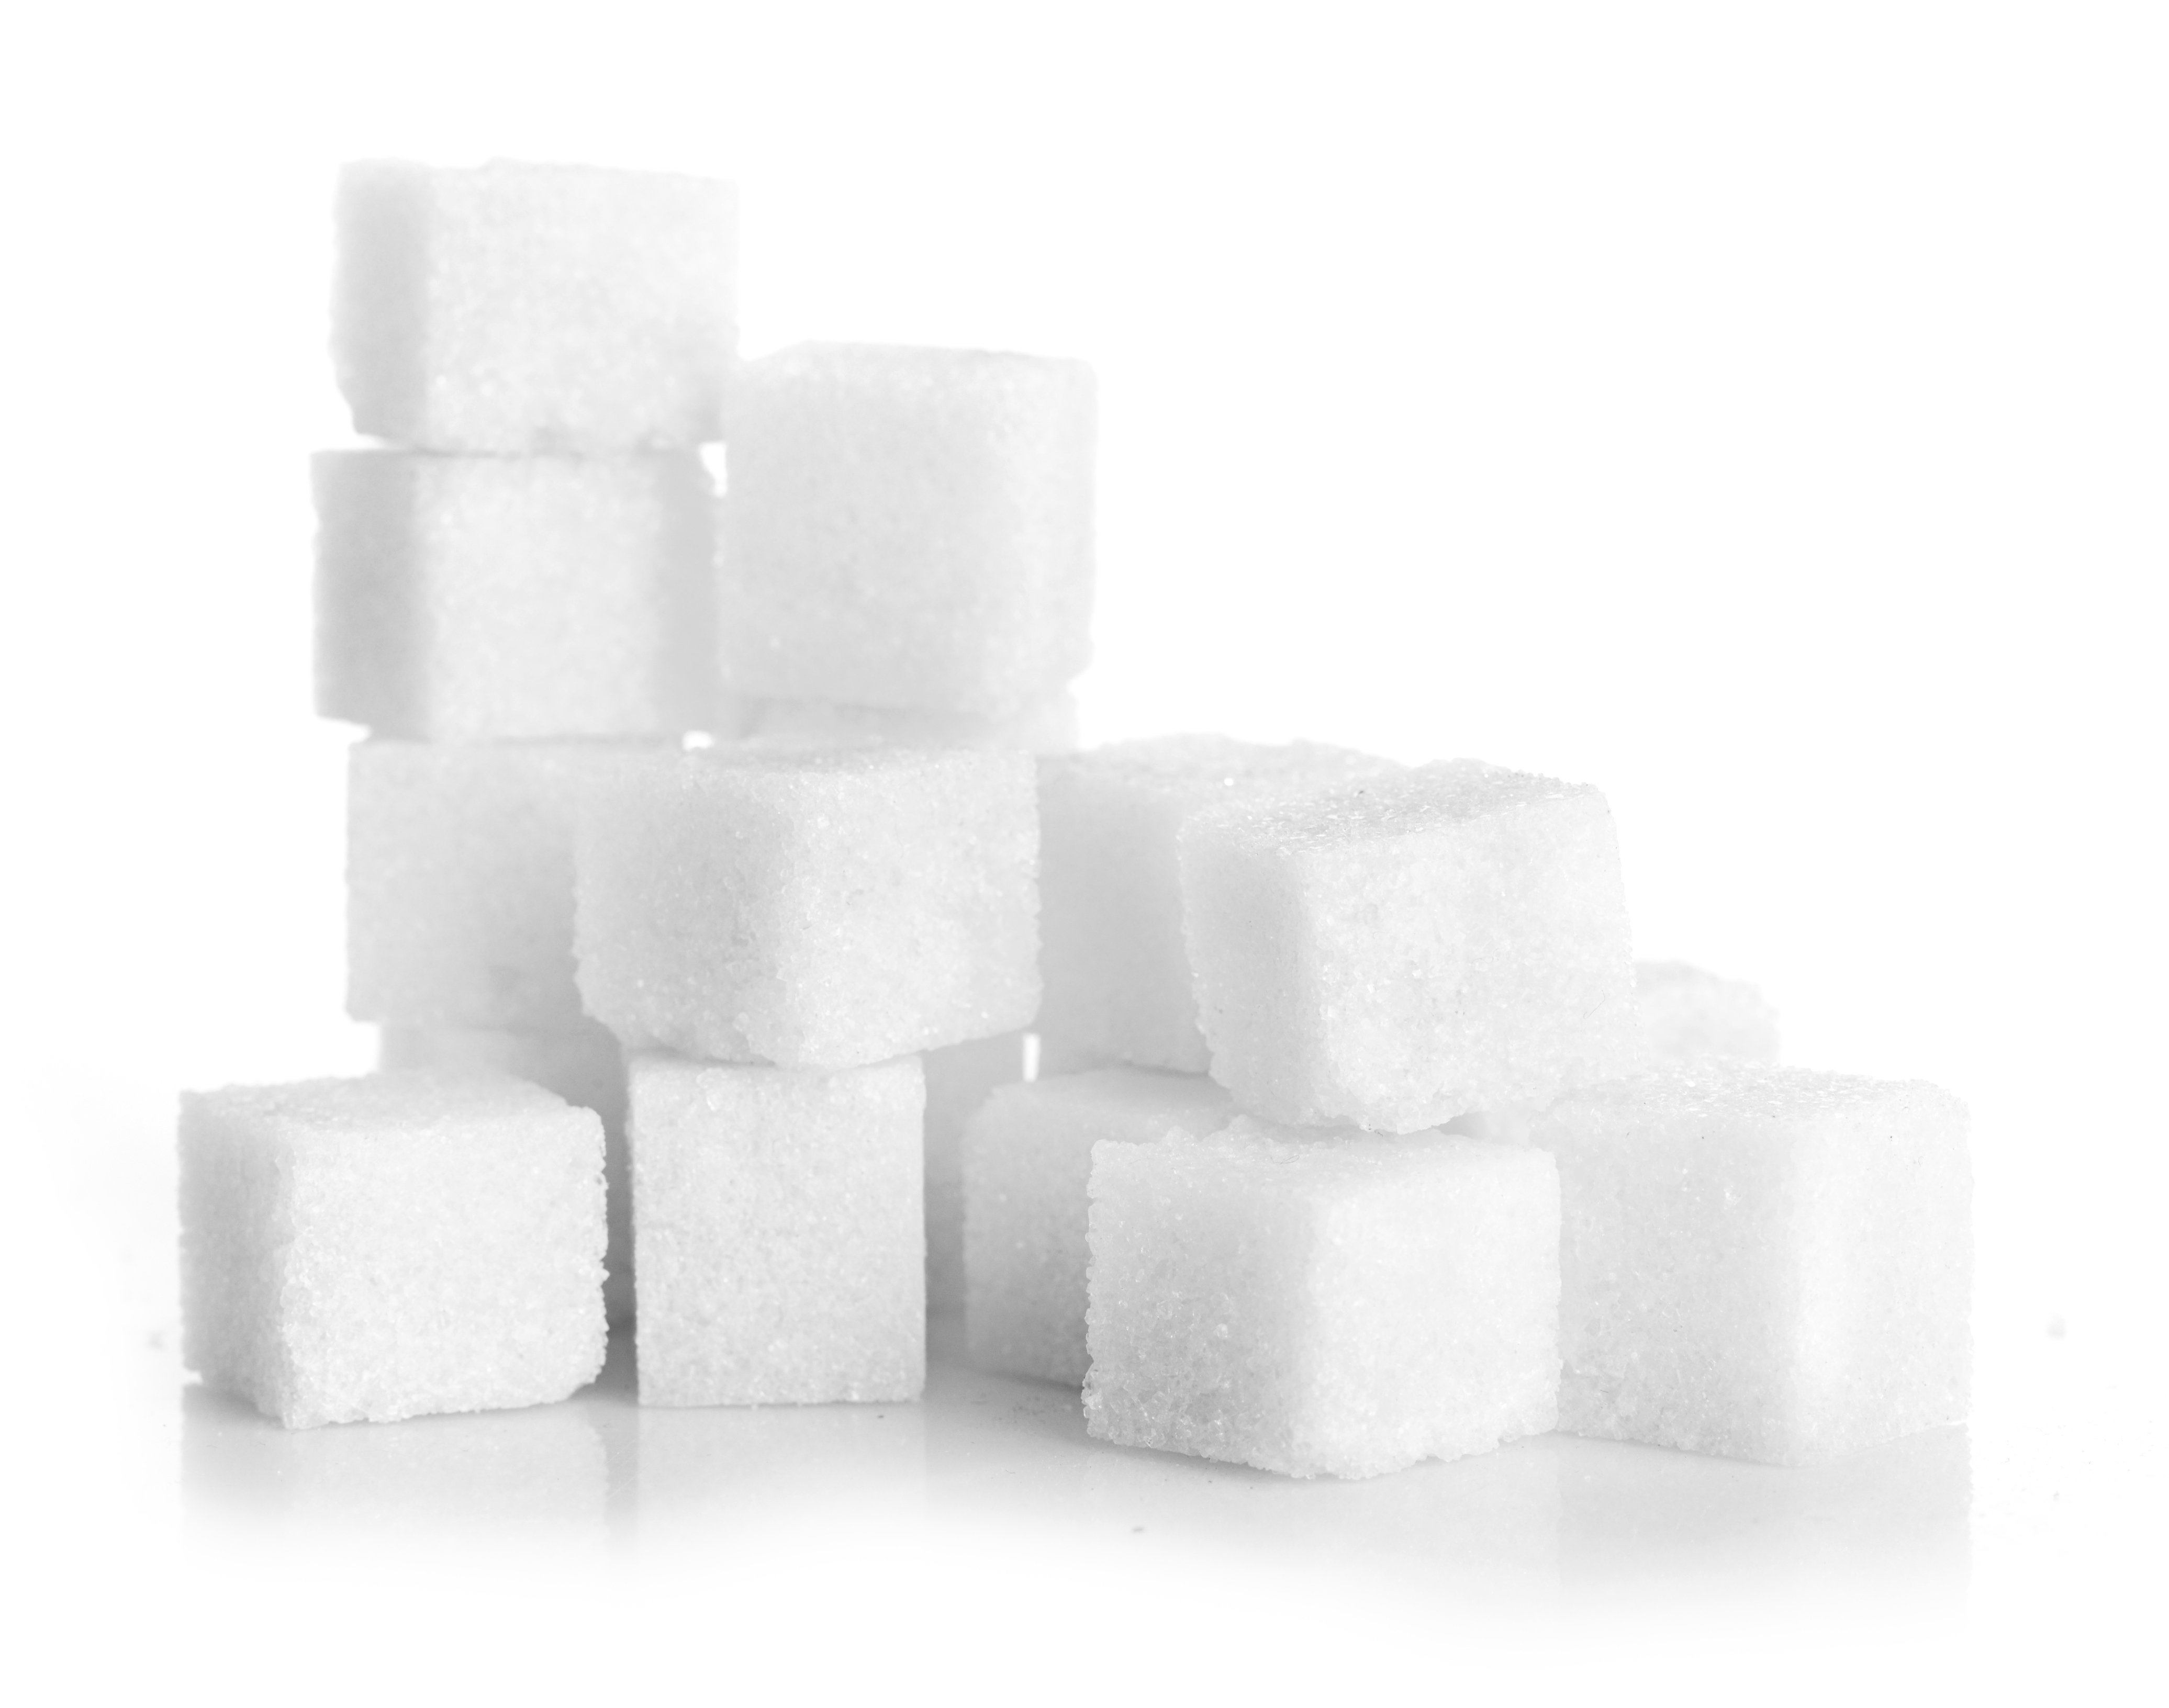 does your body breakdown artificial sweetner the same as sugar